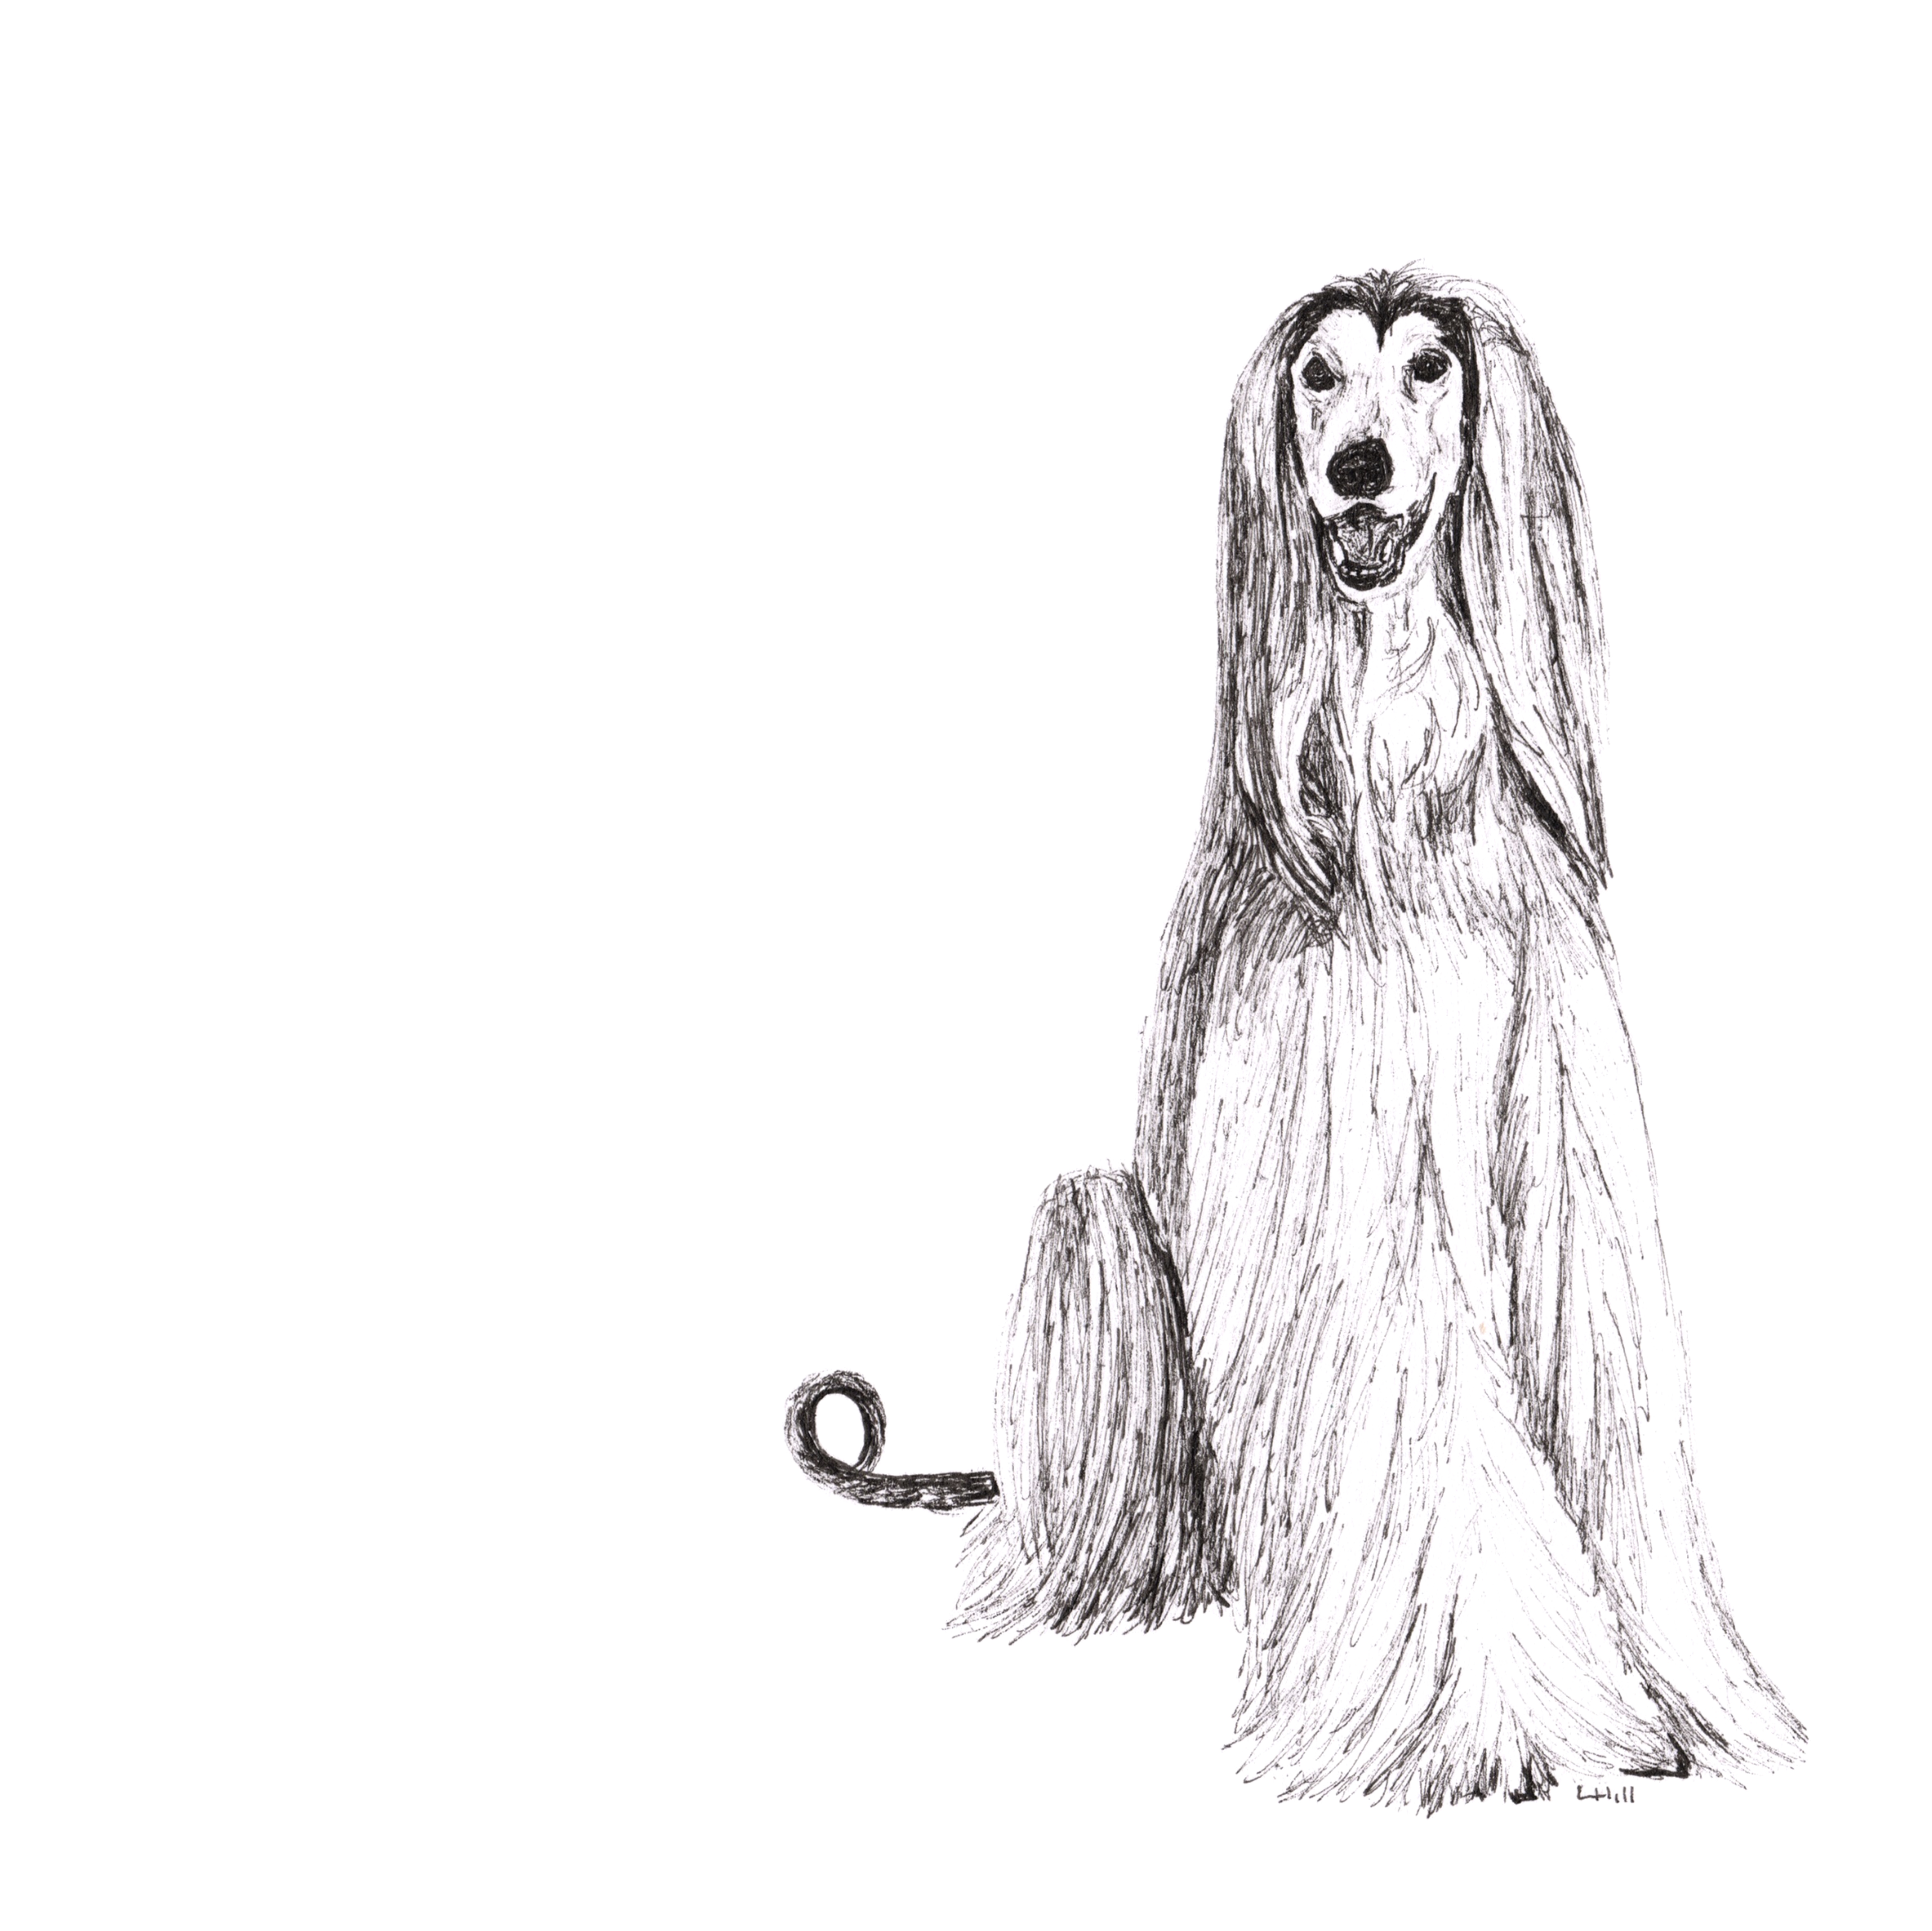 Afghan Hound pen and ink illustration by Louisa Hill